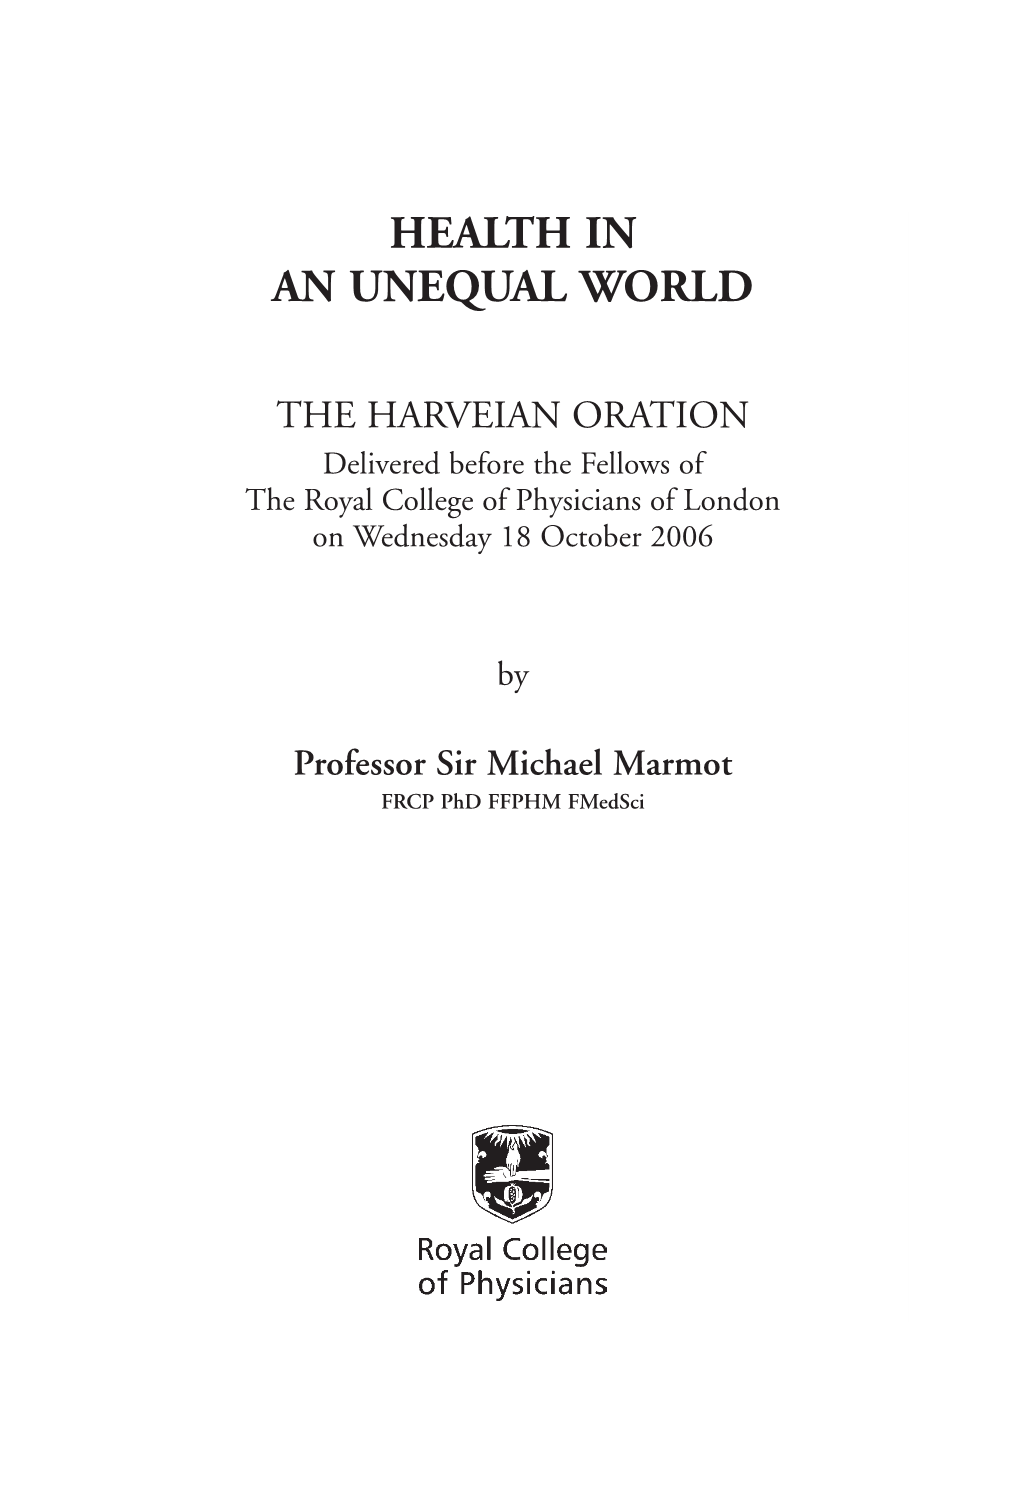 THE HARVEIAN ORATION Delivered Before the Fellows of the Royal College of Physicians of London on Wednesday 18 October 2006